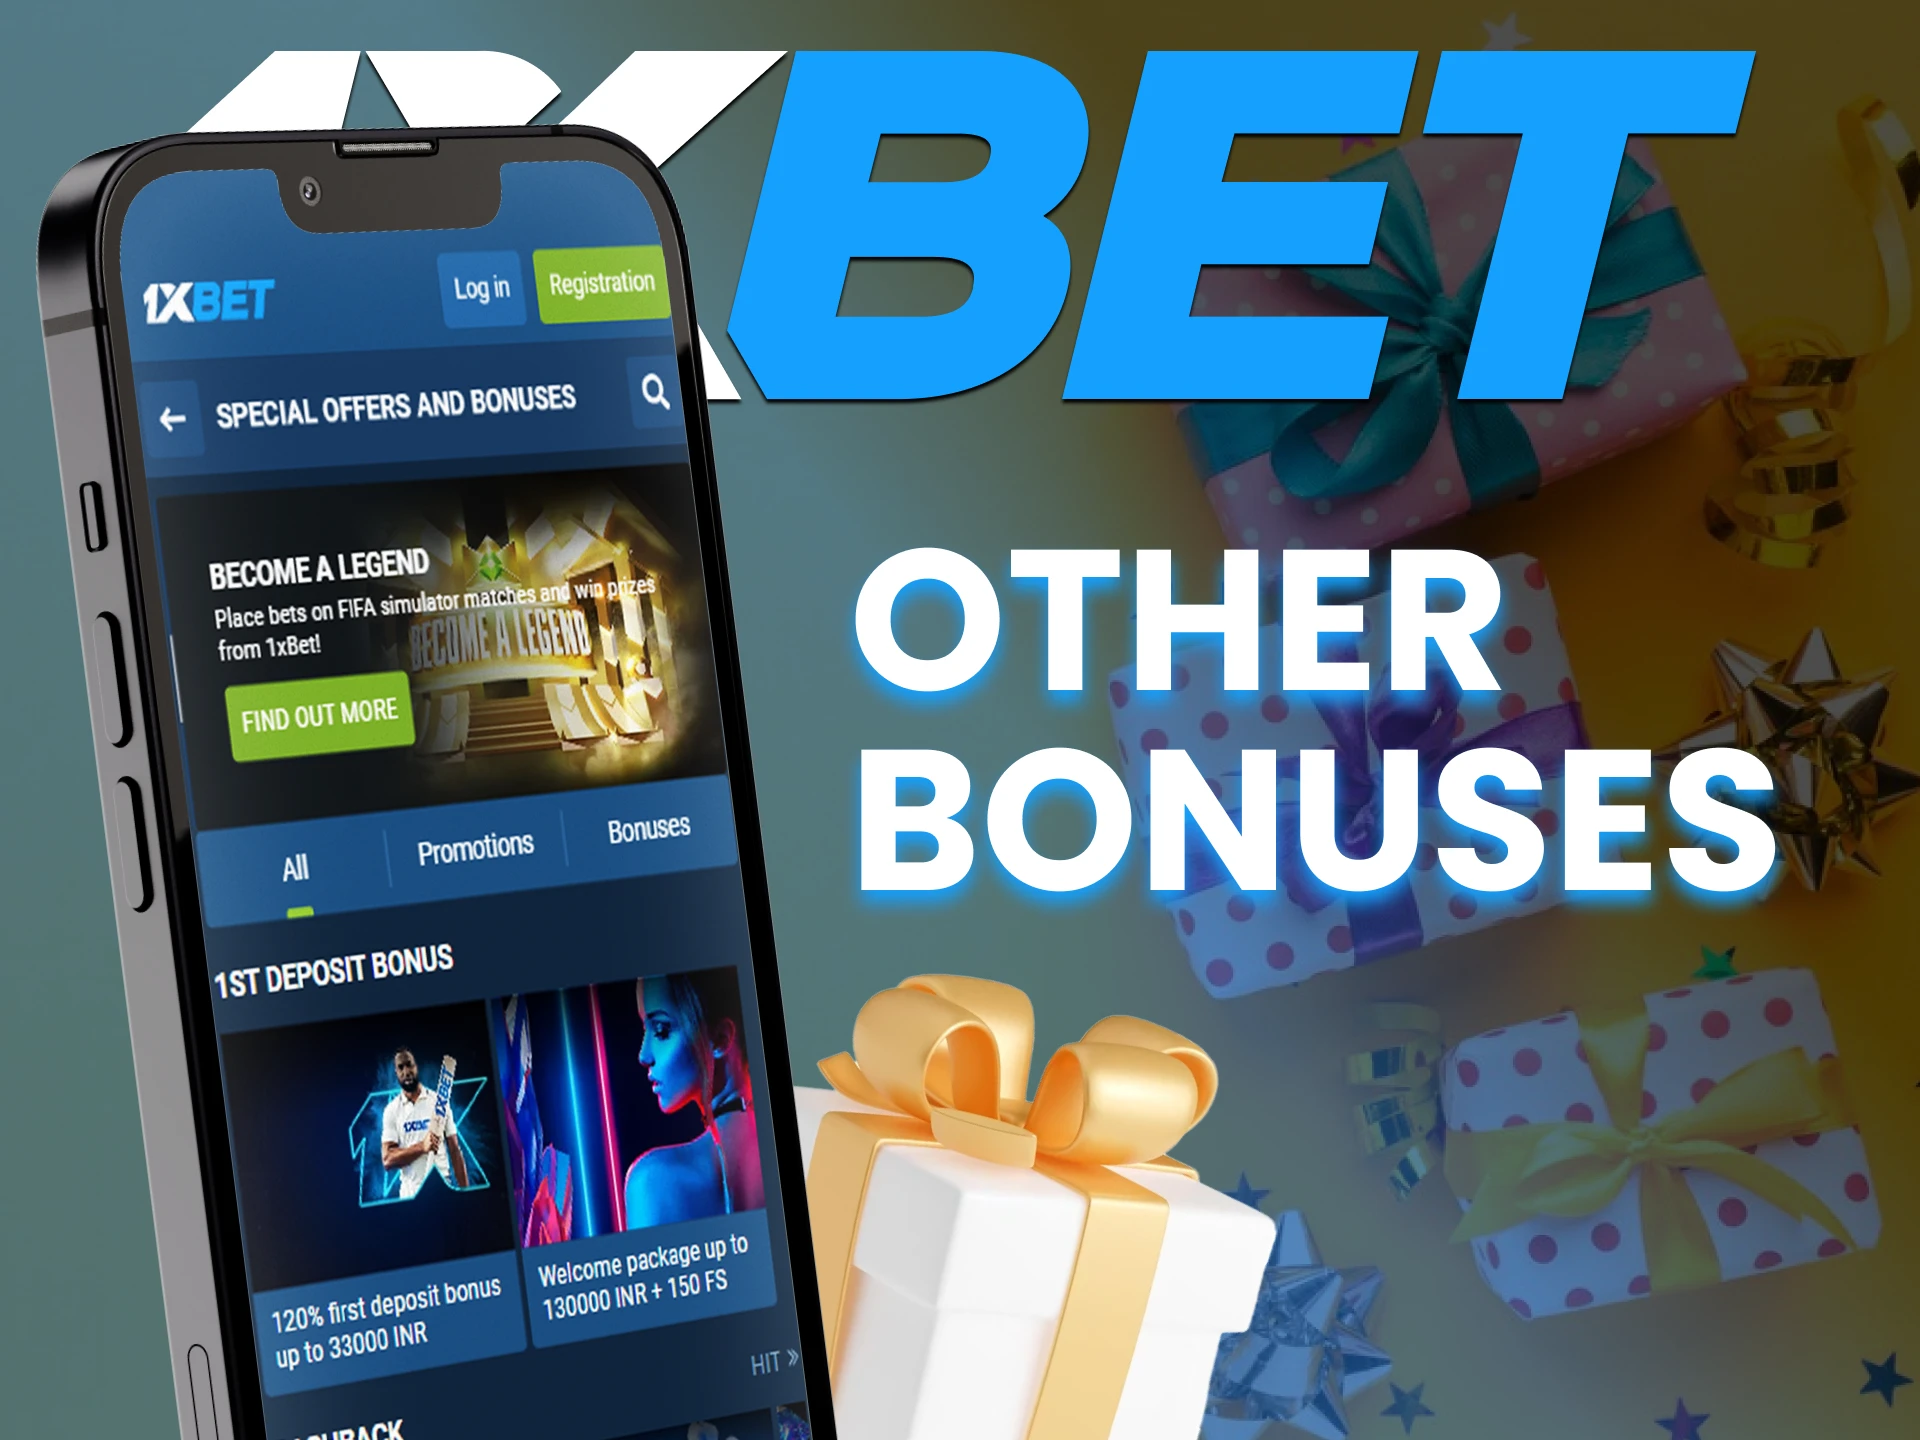 Get other bonuses from 1xbet after registration and the first deposit.